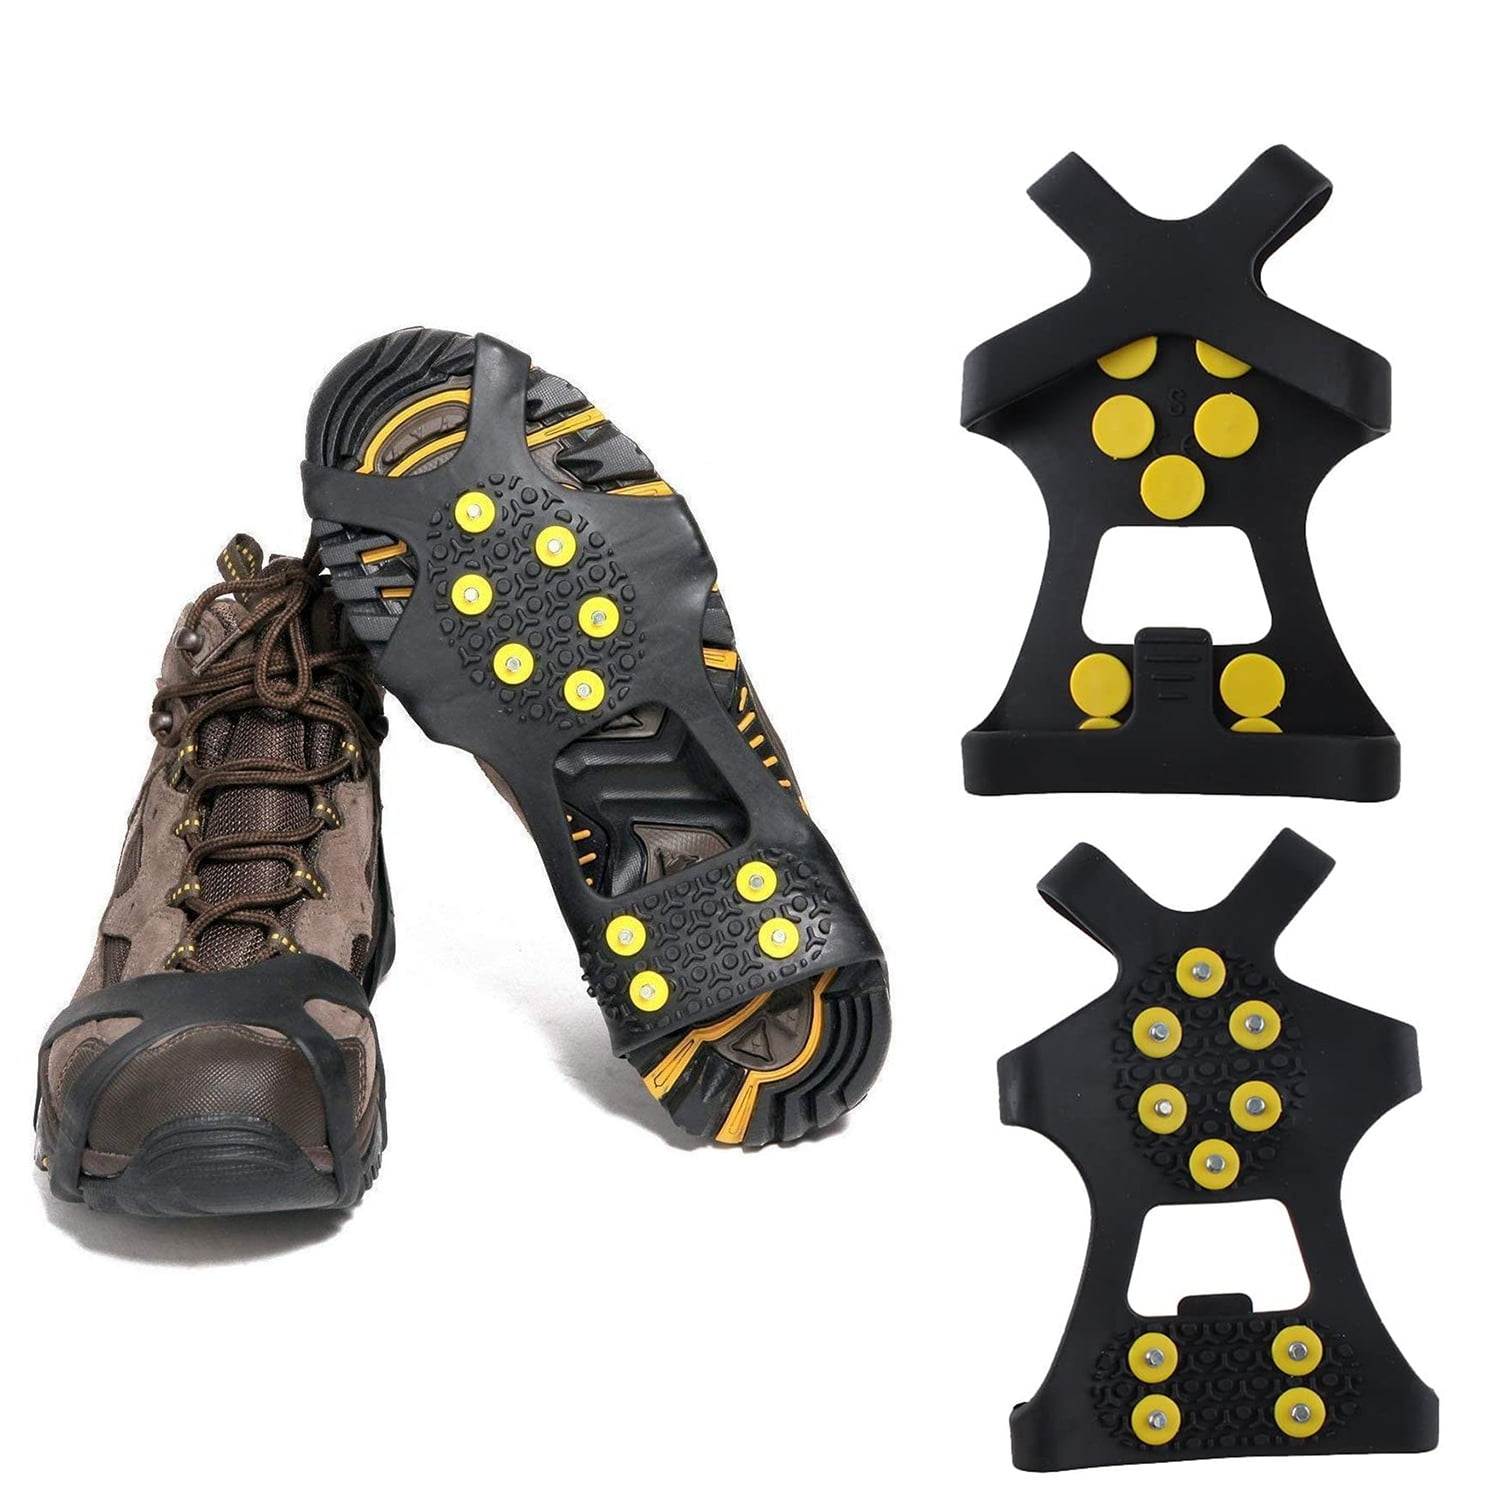 Ice Snow Anti Slip Spikes Grips Grippers Crampon Cleats For Shoes Boots Overshoe 